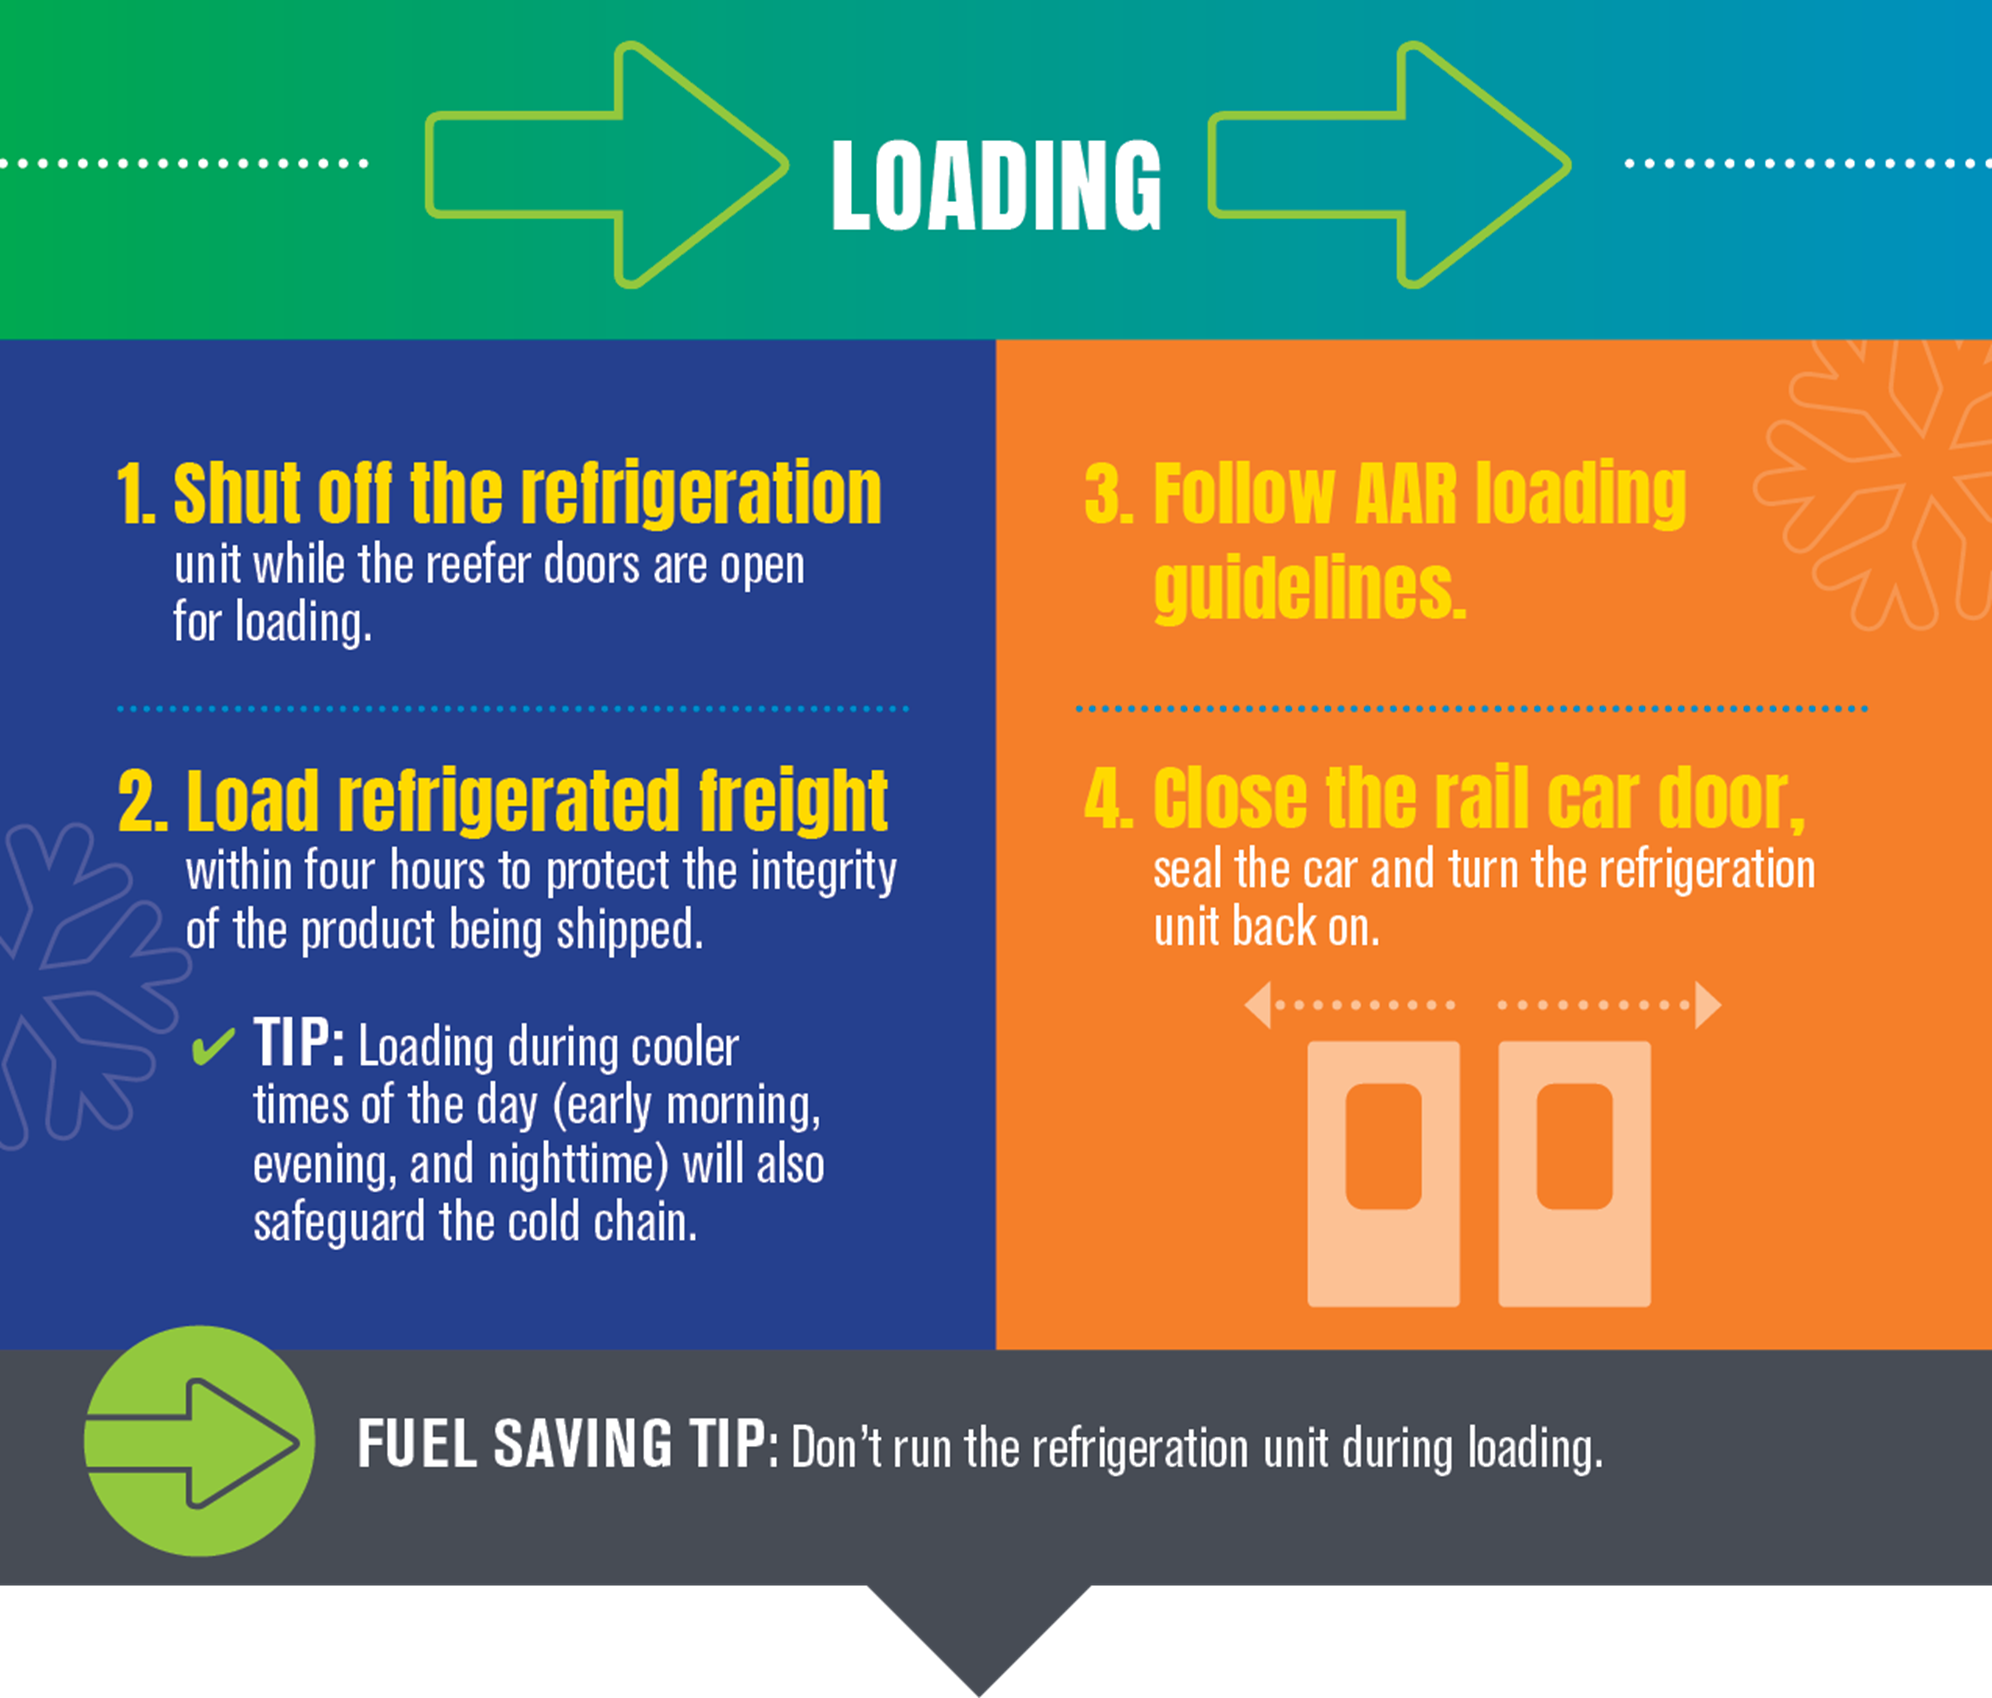 Loading_Infographic_Reefer Best Practices 080222